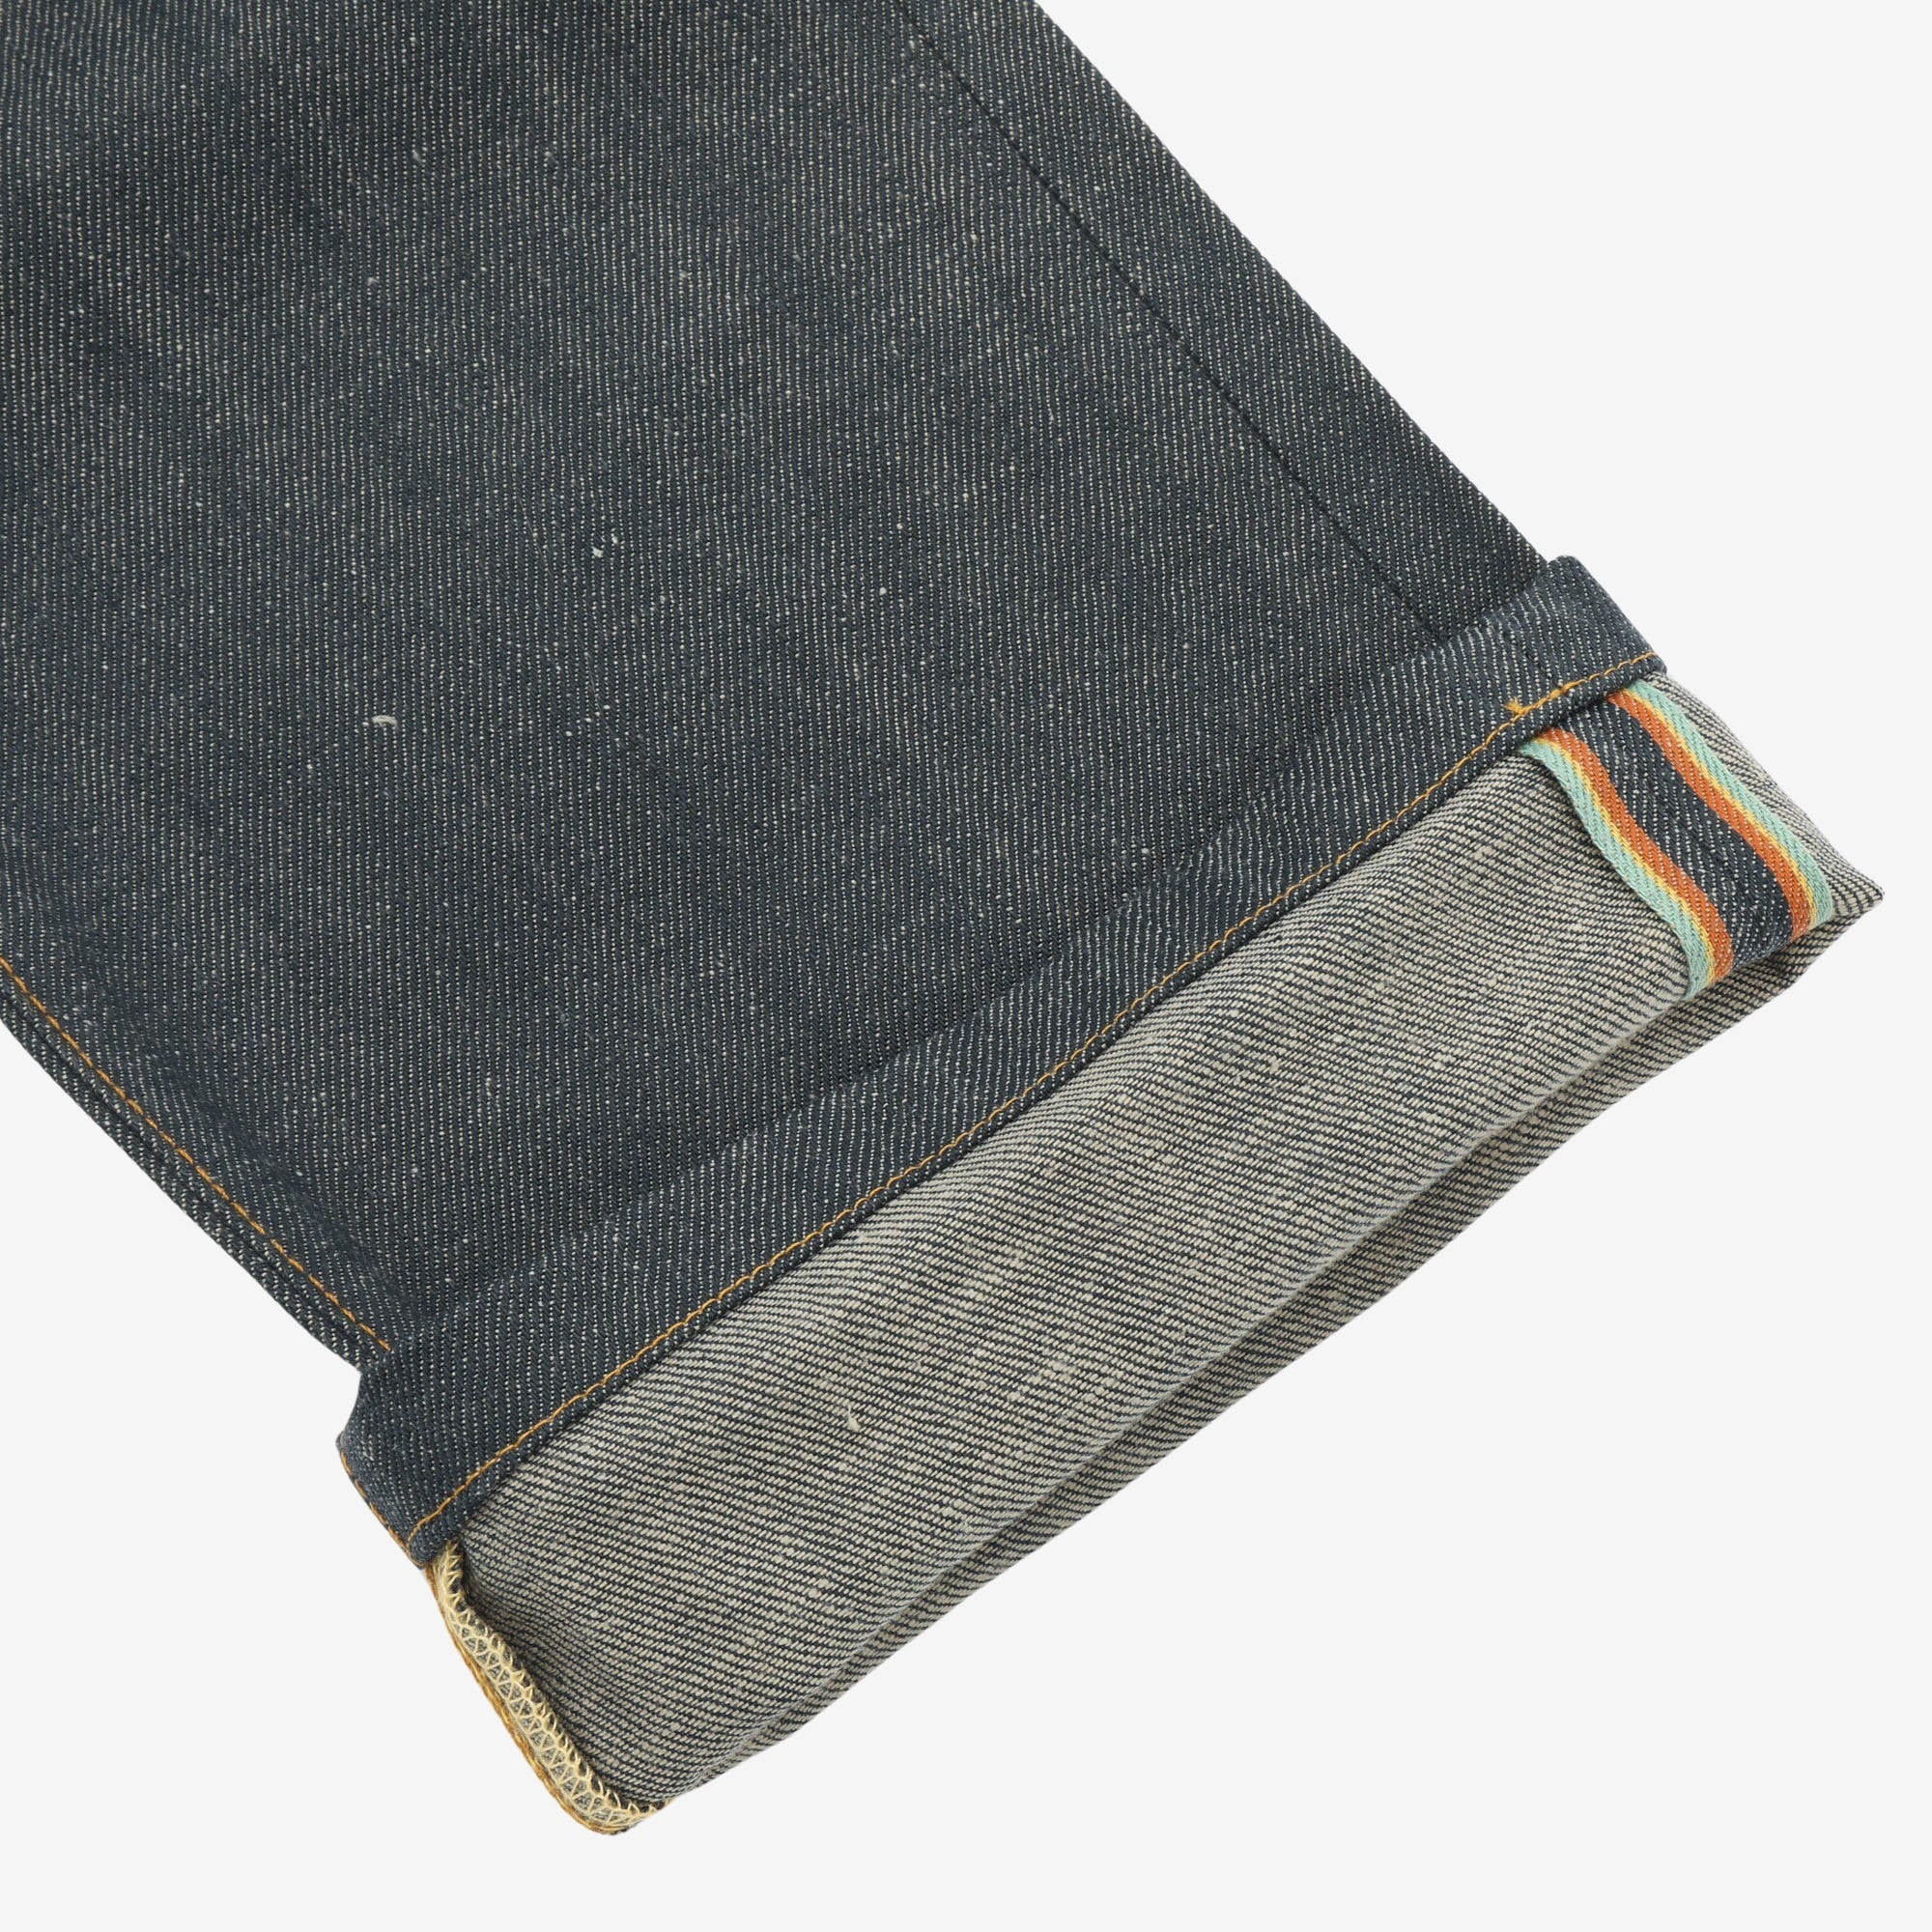 Red Listed Selvedge Jeans (28W x 29L)